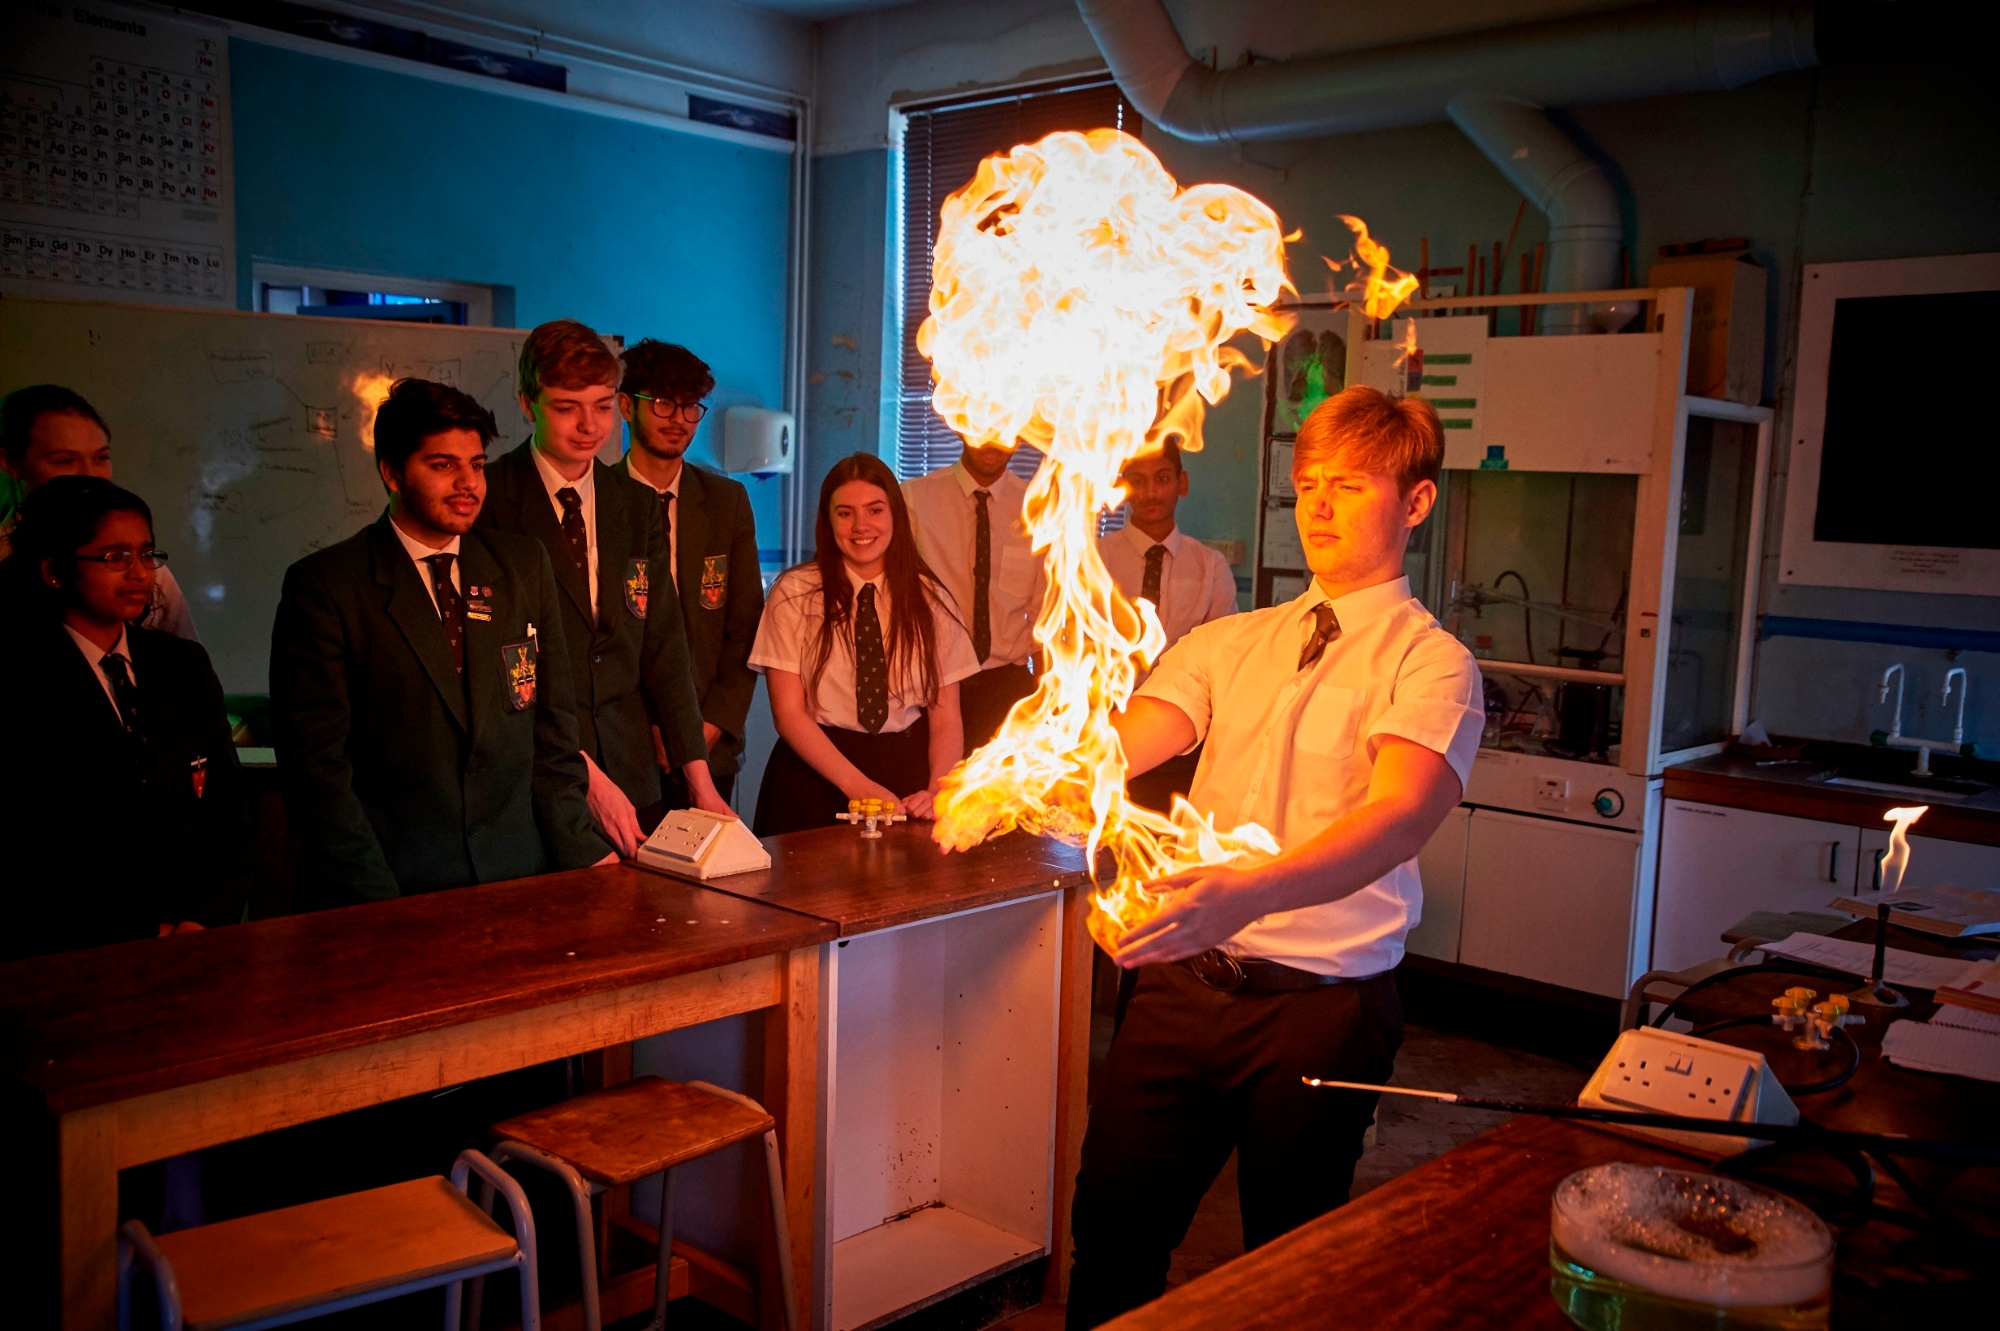 Students watching a science experiment involving flames